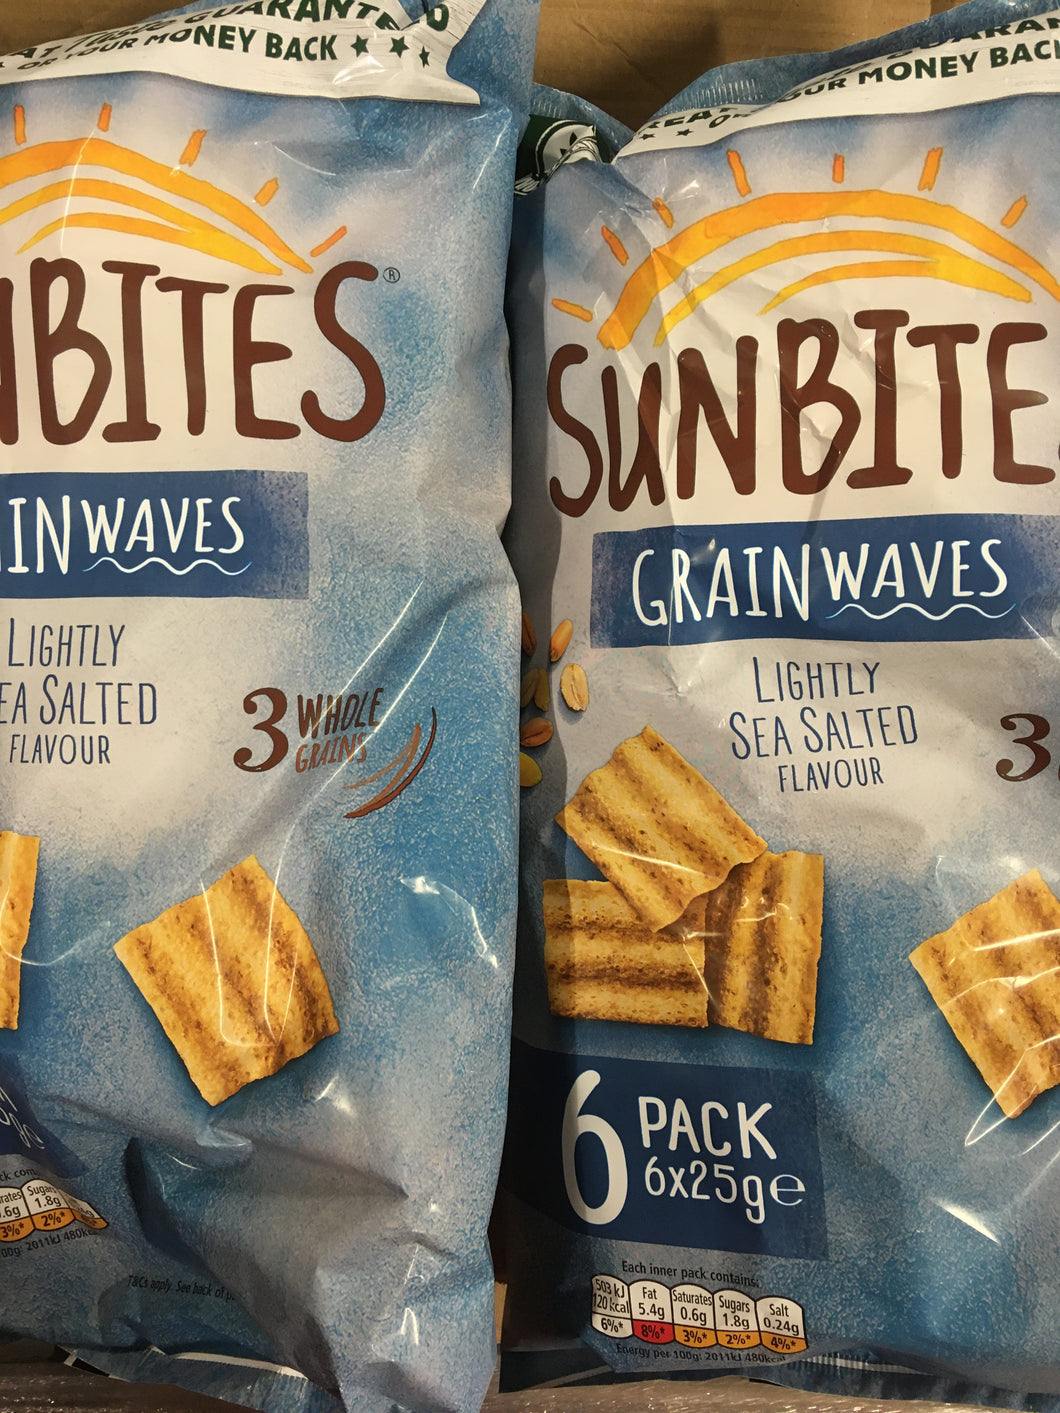 12x Walkers Sunbites Light Sea Salted Snacks (2 Packets of 6x25g)